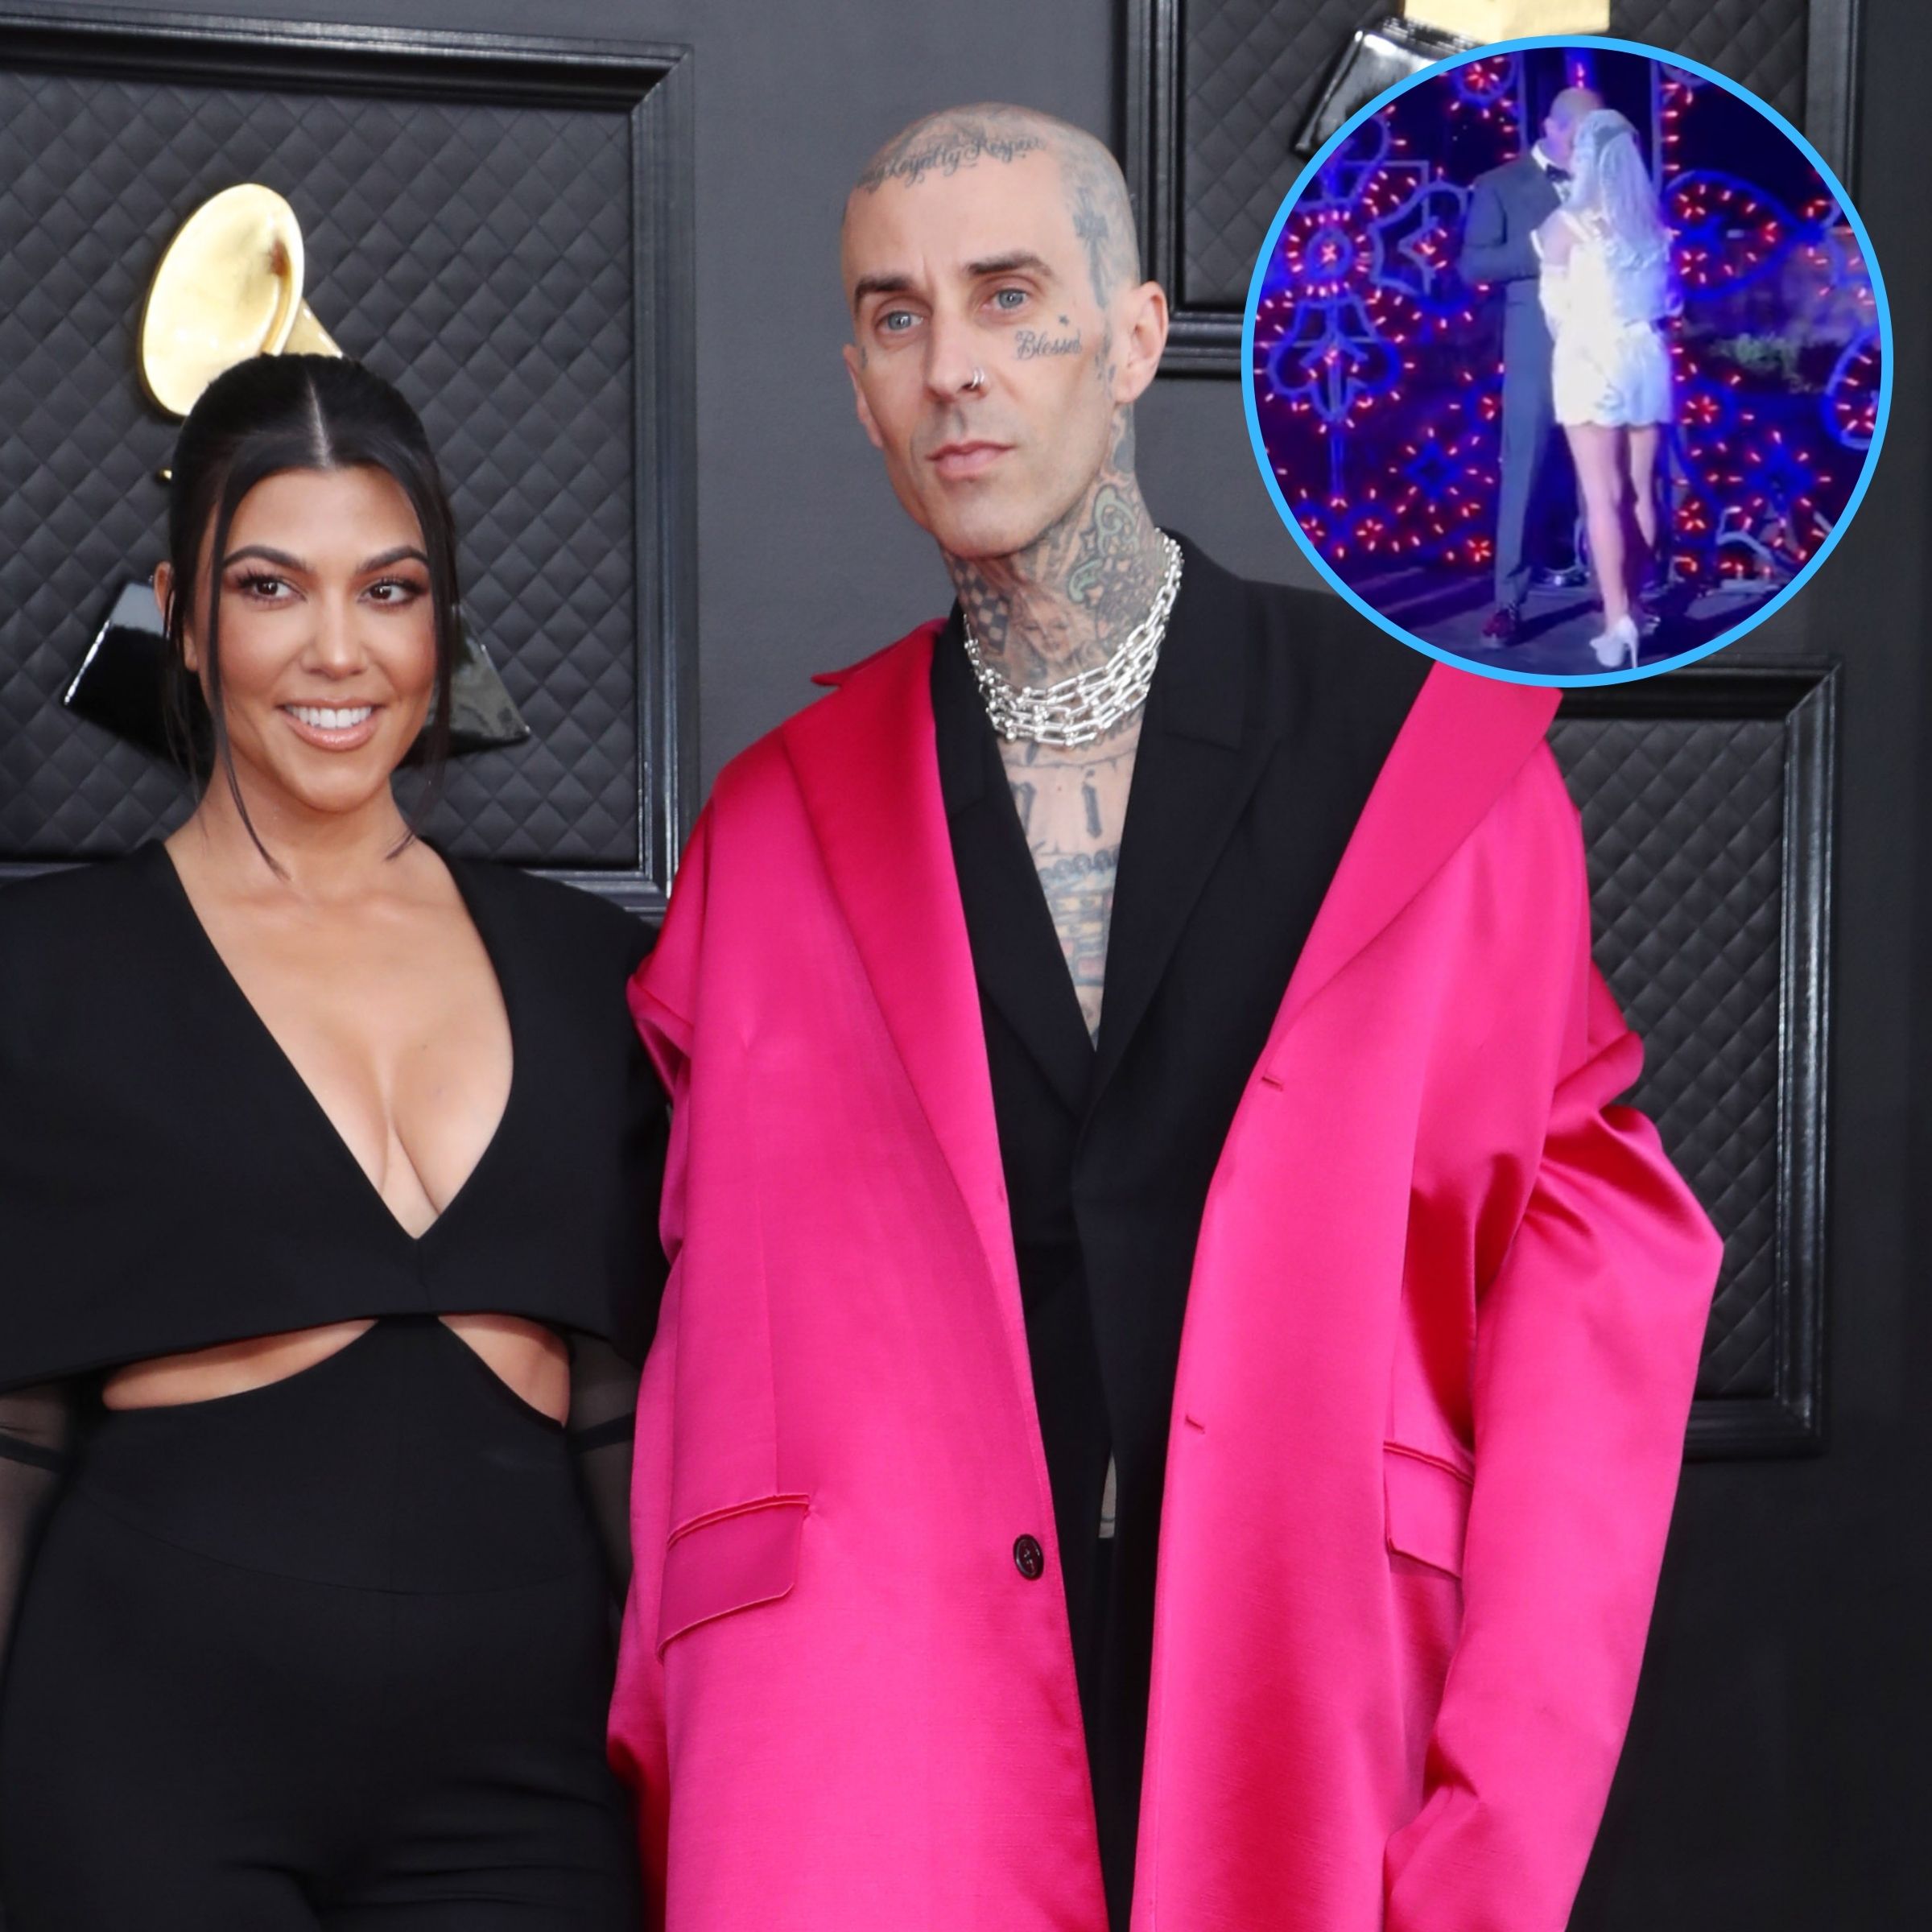 Kourtney Kardashian and Travis Barker Have Romantic First Dance While Being Serenaded by Andrea Bocelli